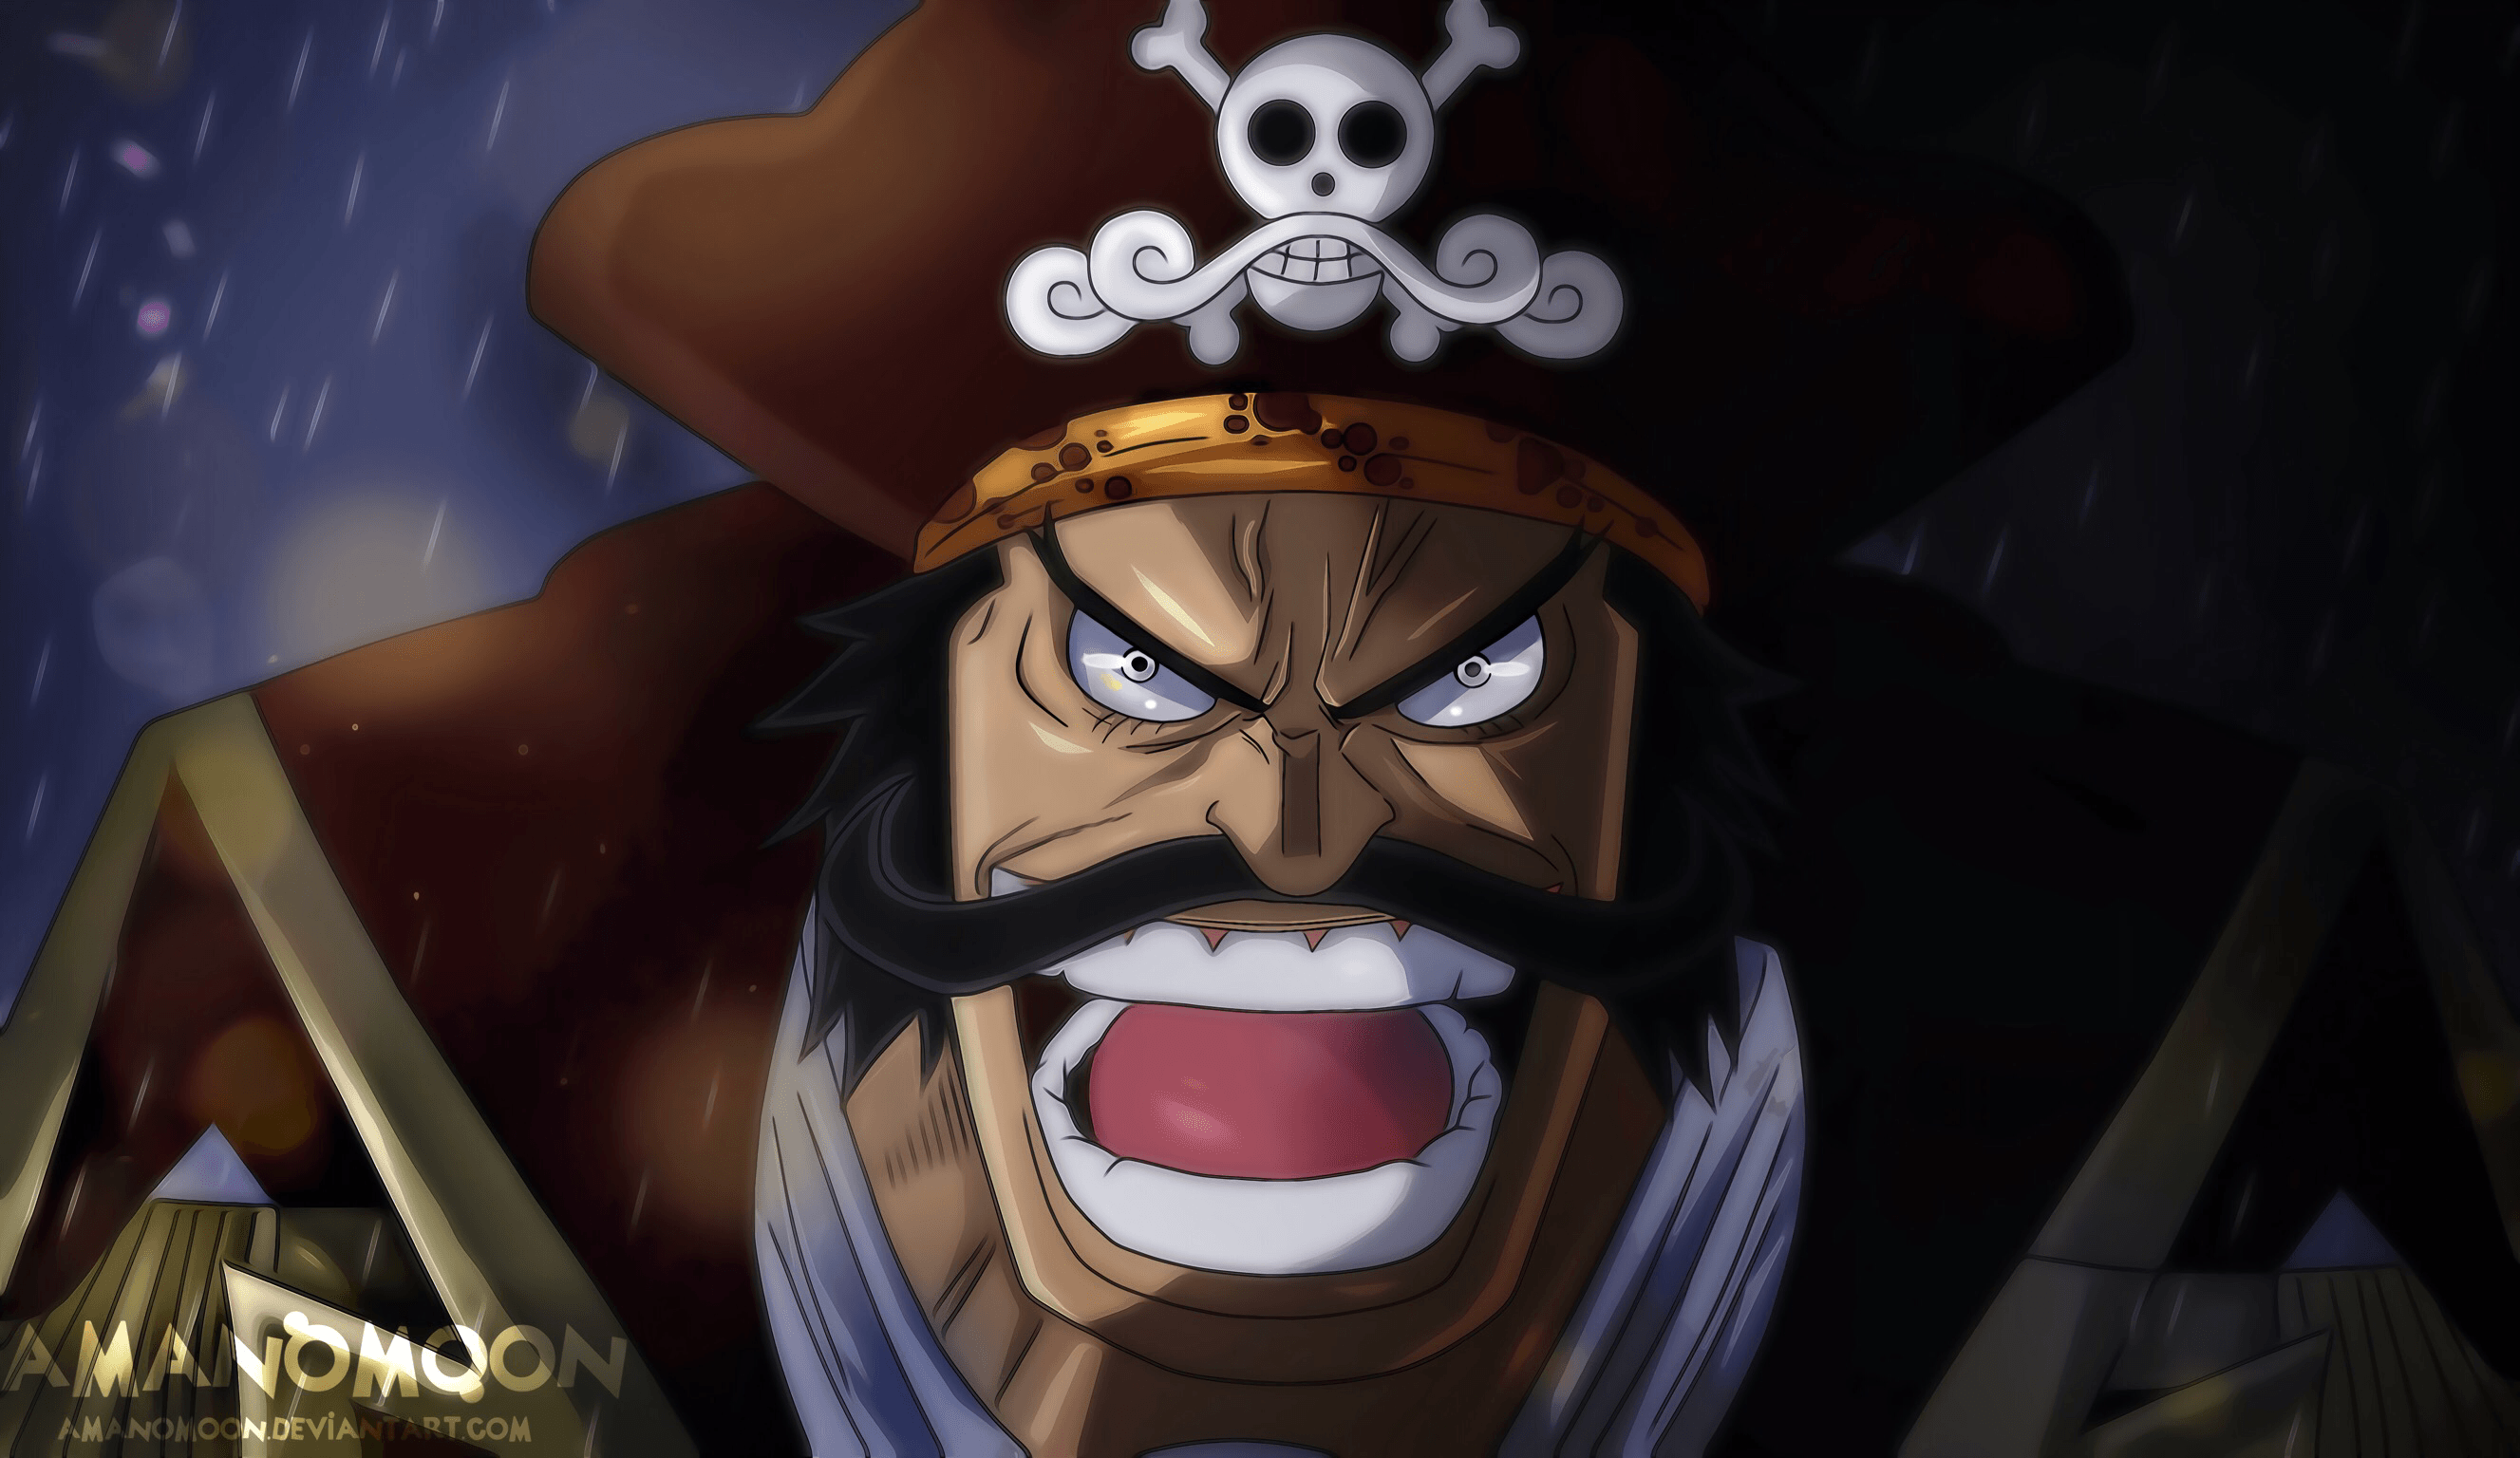 Wallpaper, Gold D Roger, One Piece, pirate king, Amanomoon 2654x1536